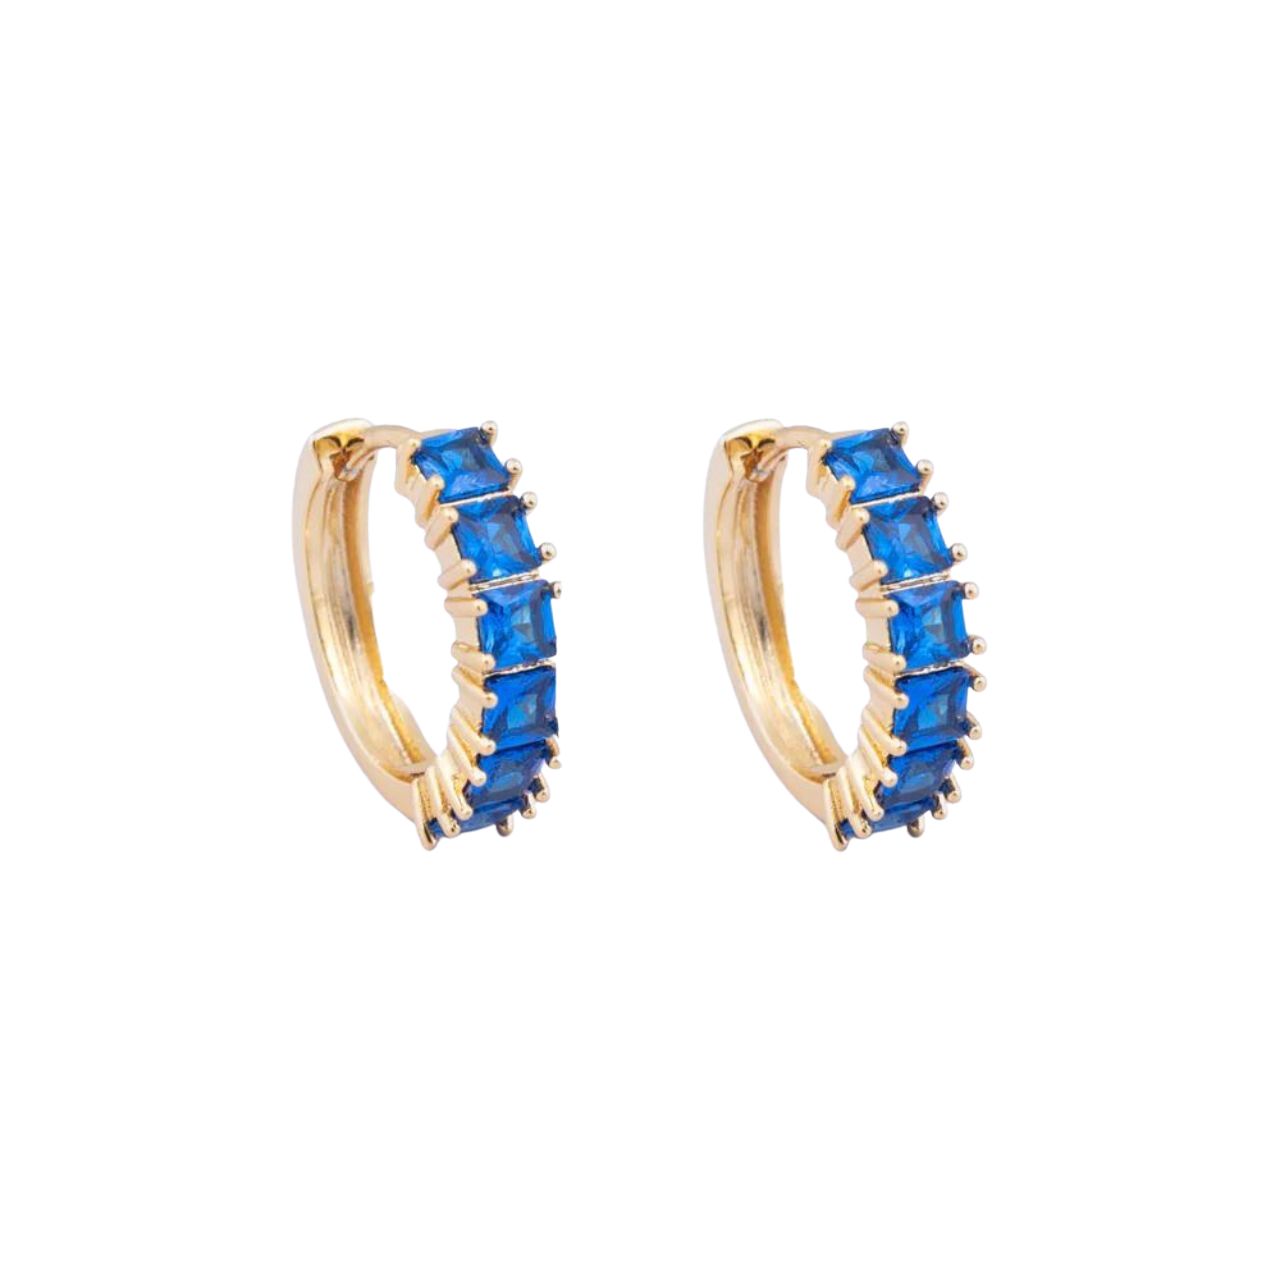 Knight & Day Classic Sapphire Hoops Earrings   Classic style hoops embellished with sapphire CZ stones. Gold plating.